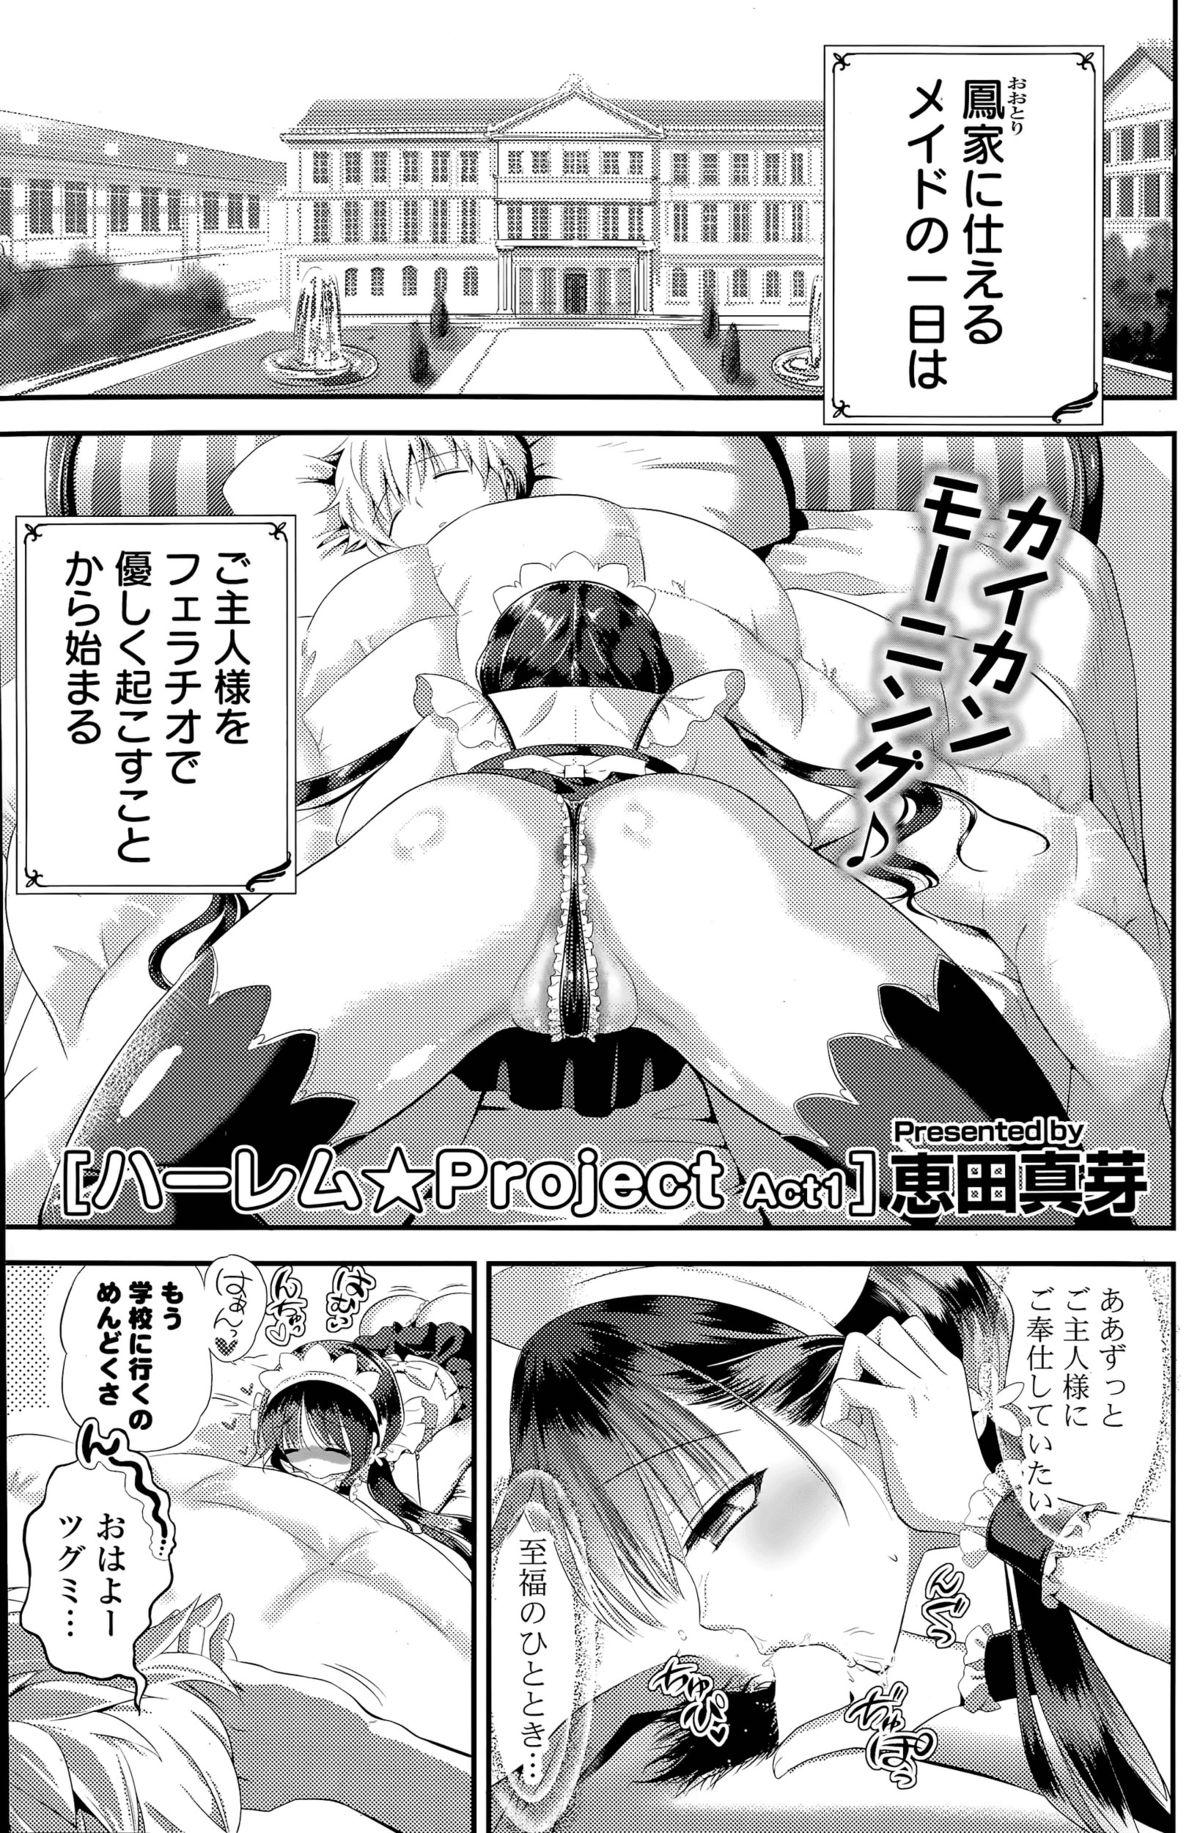 Brunet Harem ☆ Project Ch. 1-3 Gayclips - Page 1